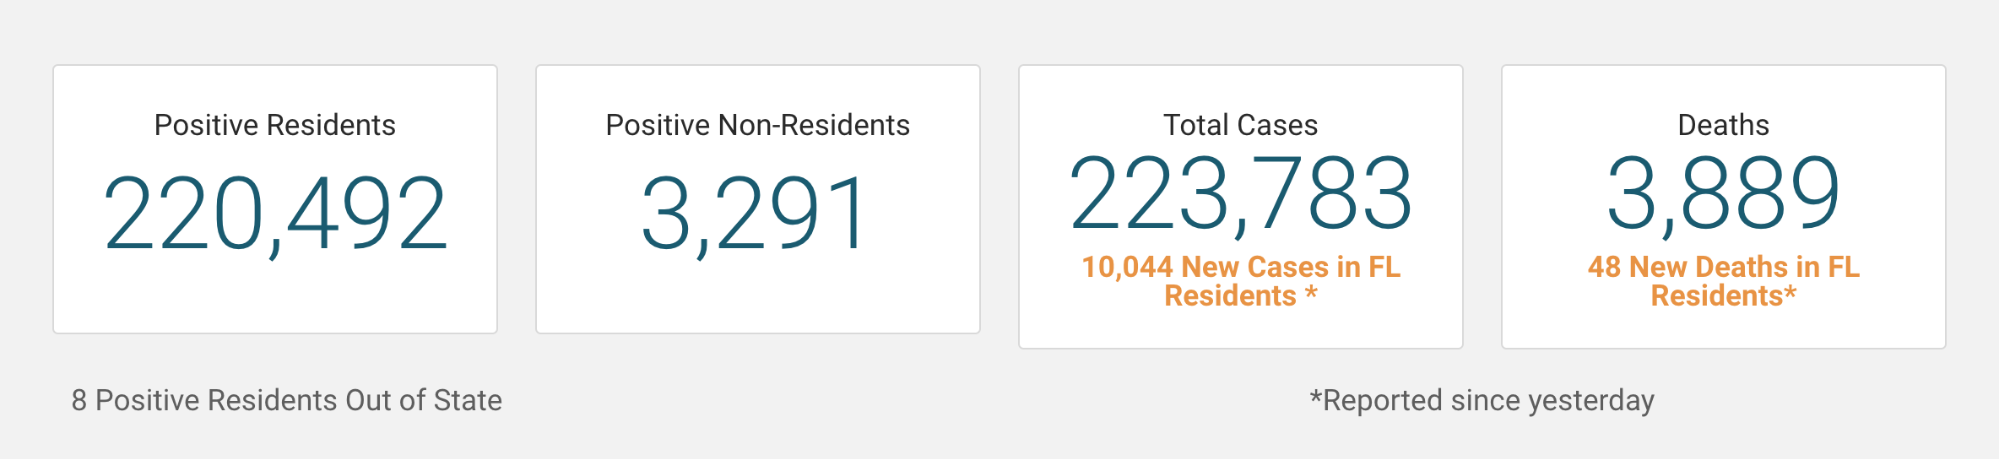 Screenshot of Florida's topline data display on their COVID-19 website, showing case and death counts that include non-residents, and resident cases and deaths as footnotes. 